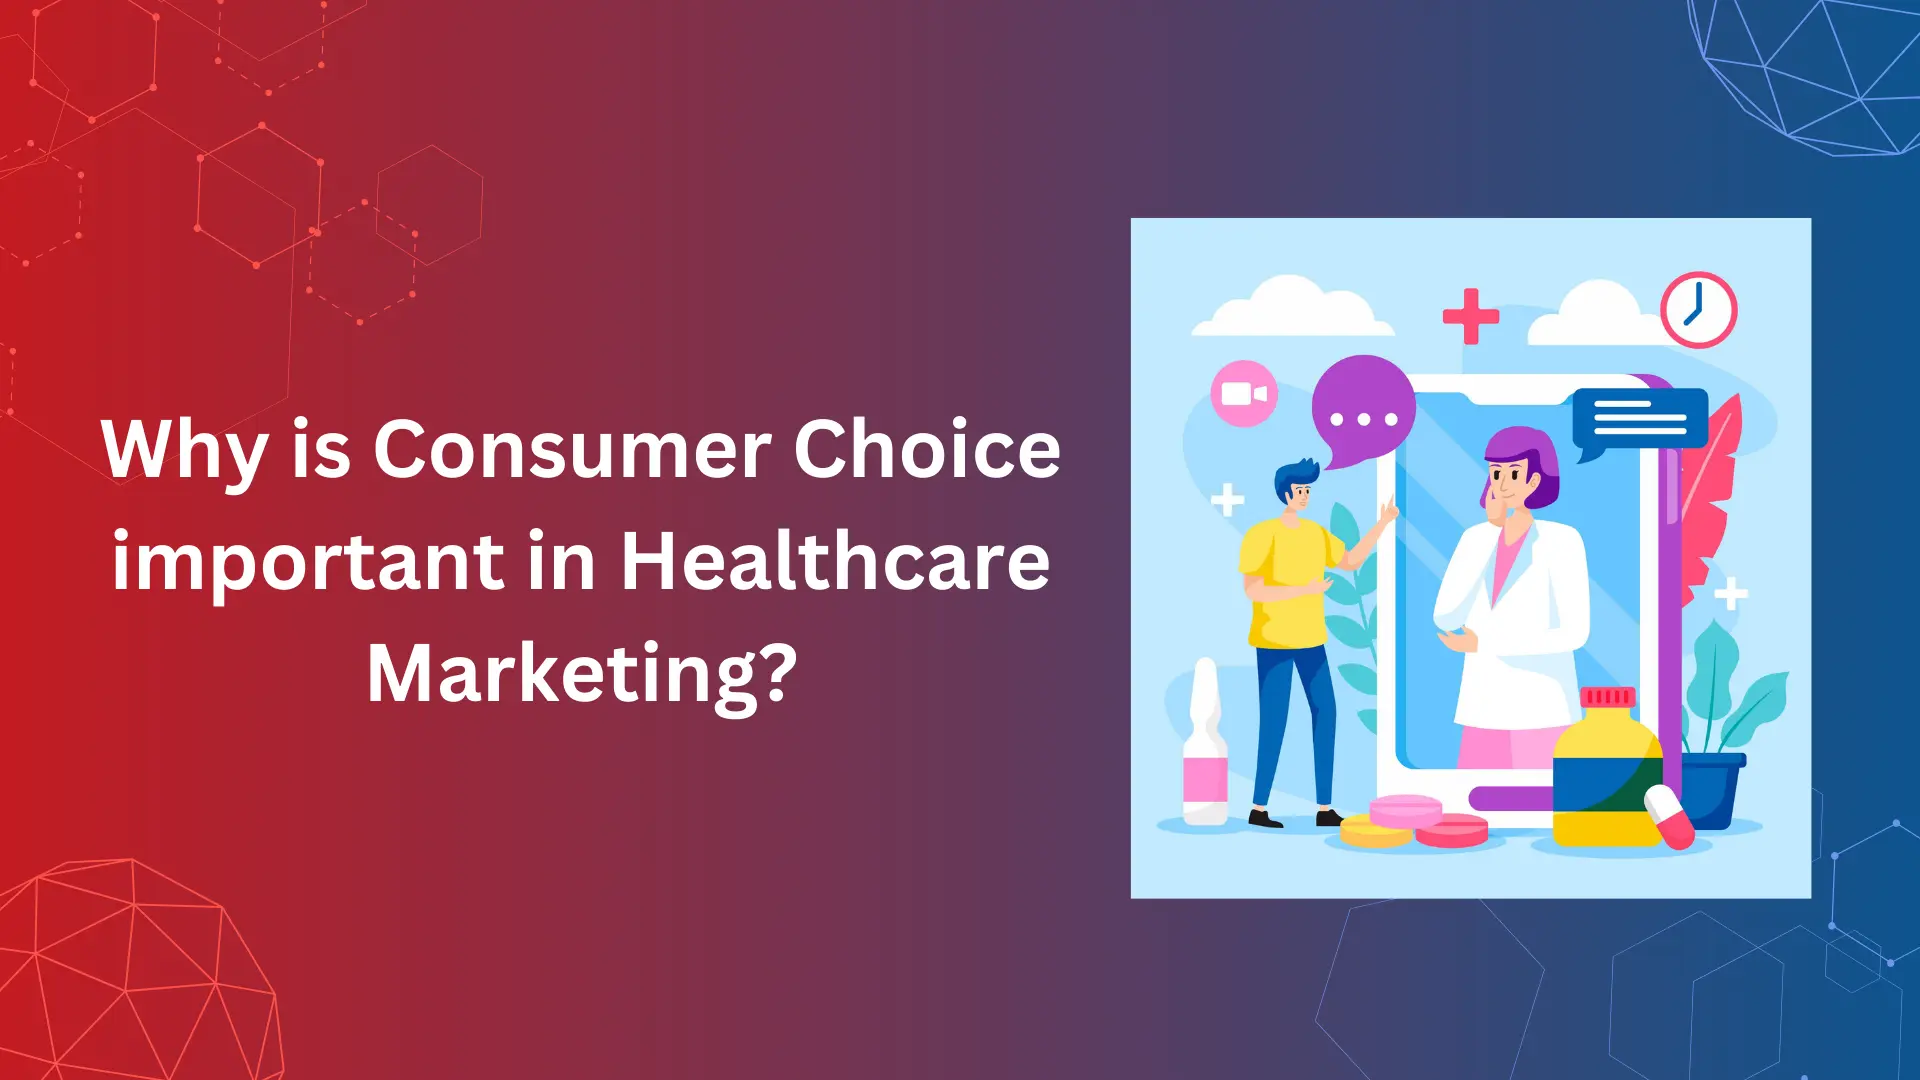 Why is consumer choice important in healthcare marketing